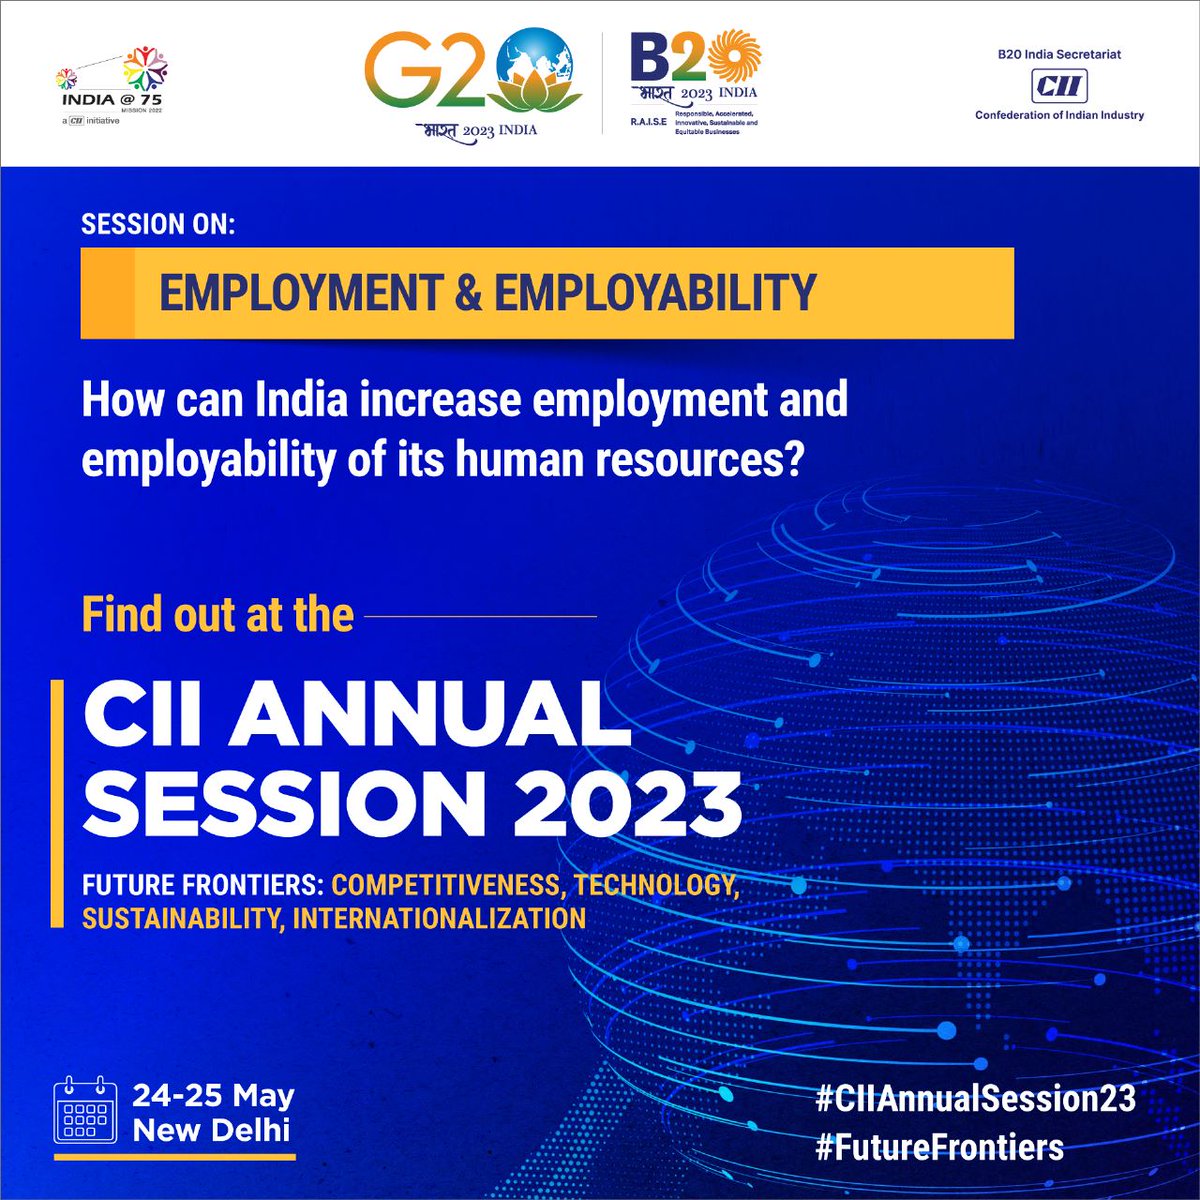 #StayTuned as decision makers & thought leaders deliberate on the future of ‘Employment & Employability' in India at the #CIIAnnualSession23.
Visit➡ ciiannualsession.in/index.html 
#FutureFrontiers #technology #sustainability #development